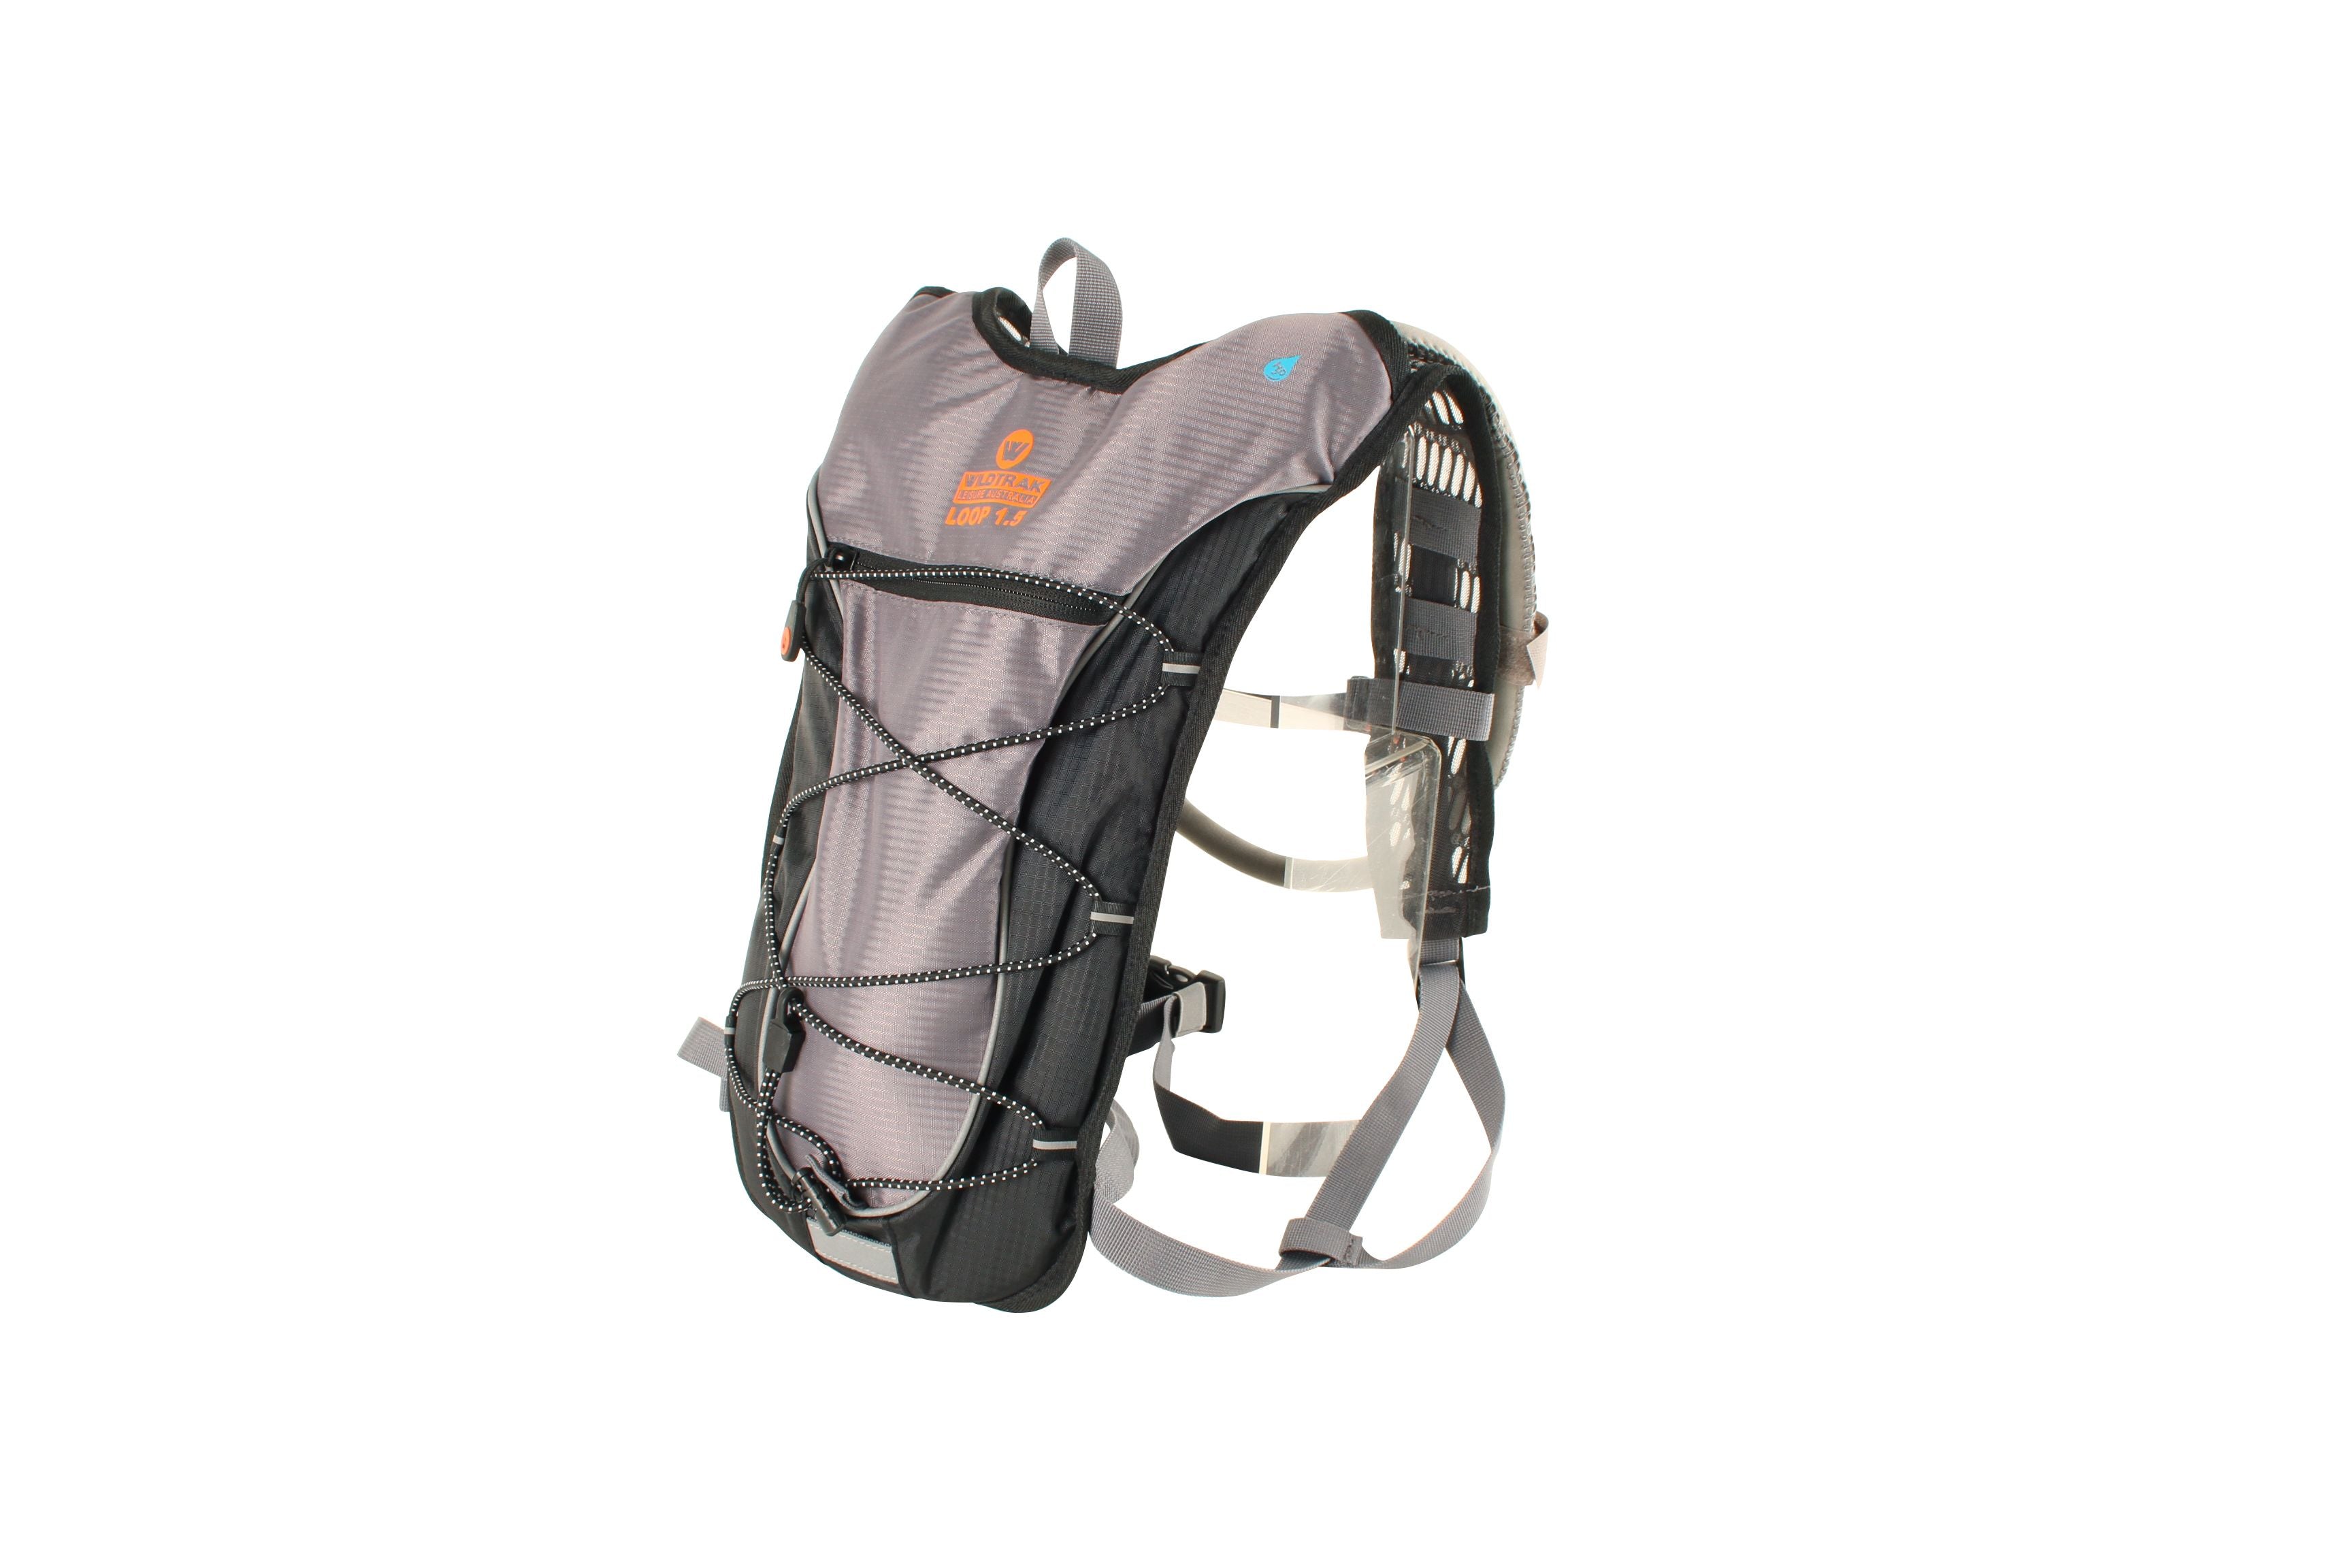 1.5 LITRE LOOP HYDRATION PACK